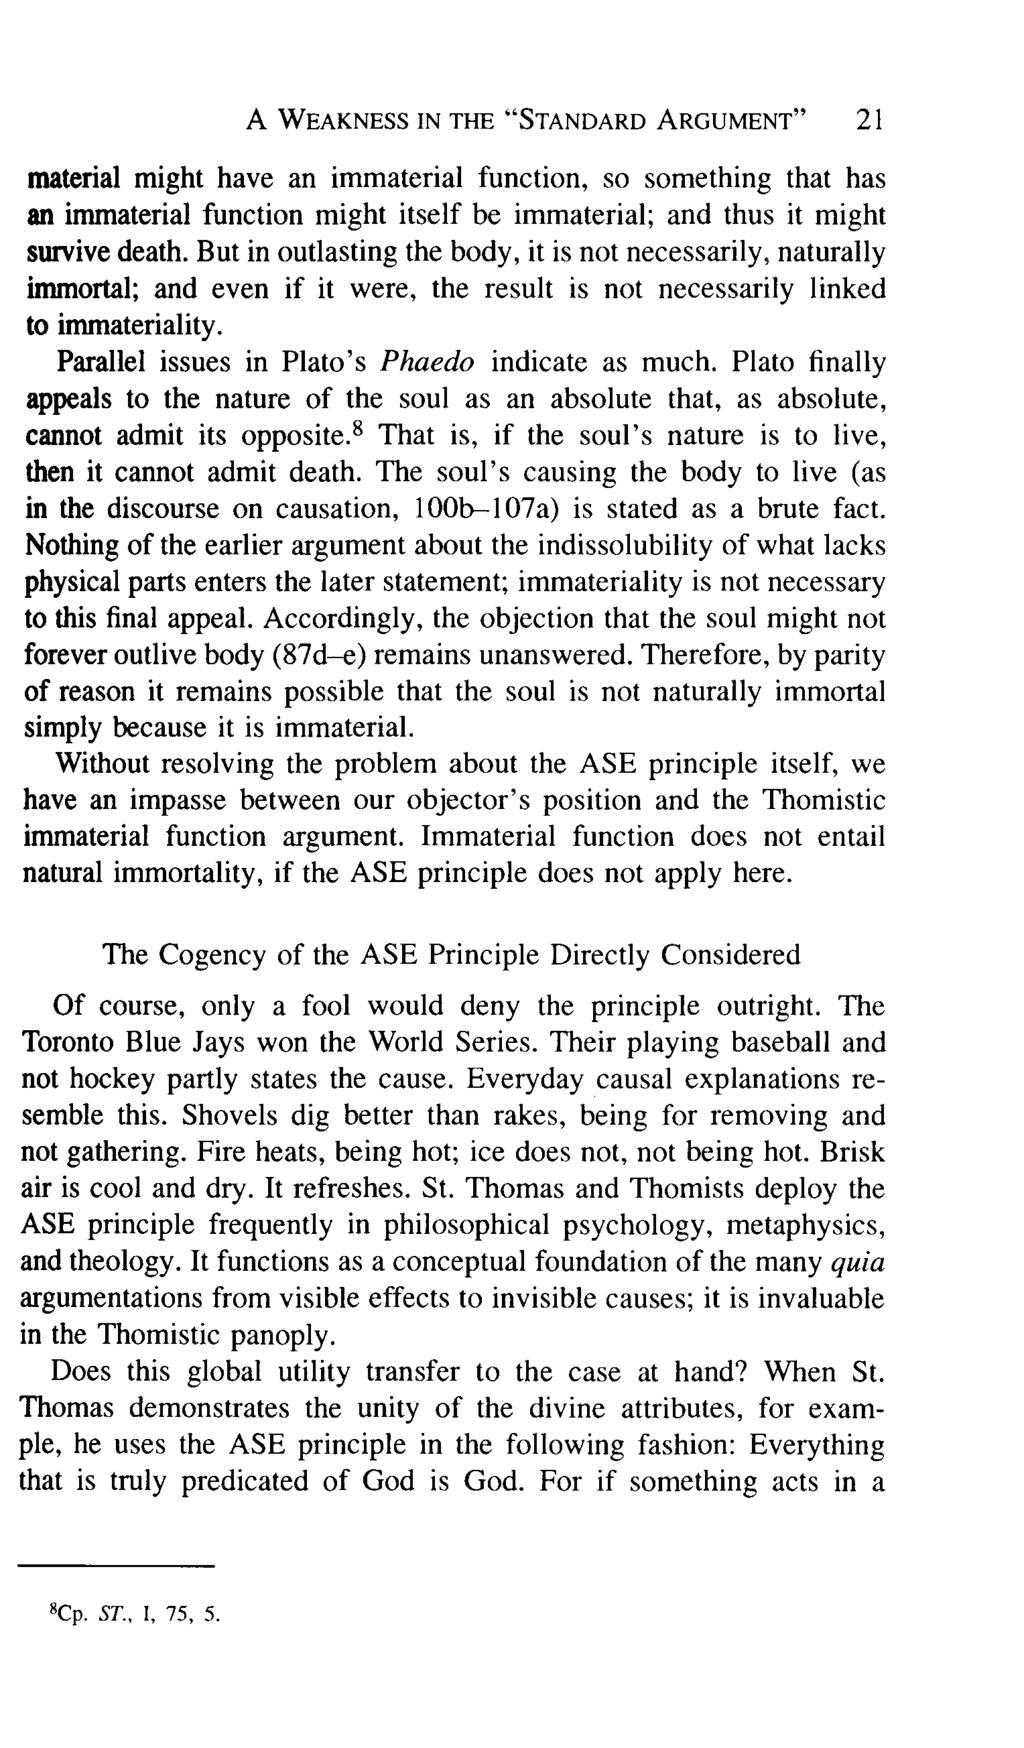 A WEAKNESS IN THE "STANDARD ARGUMENT" 21 might have an immaterial function, so something that has an immaterial function might itself be immaterial; and thus it might survive death.